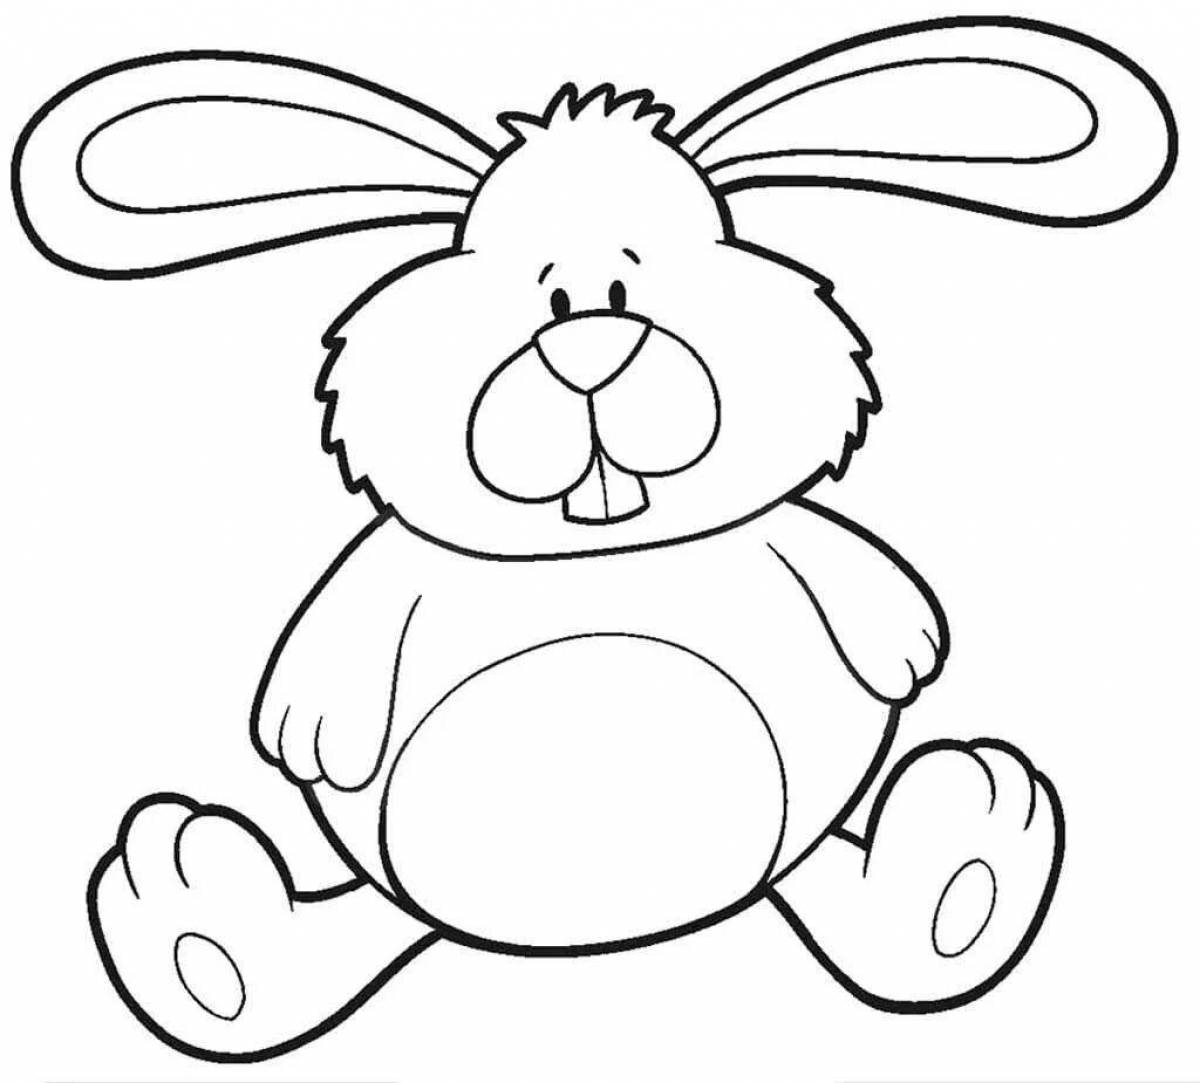 Witty bunny coloring book for kids